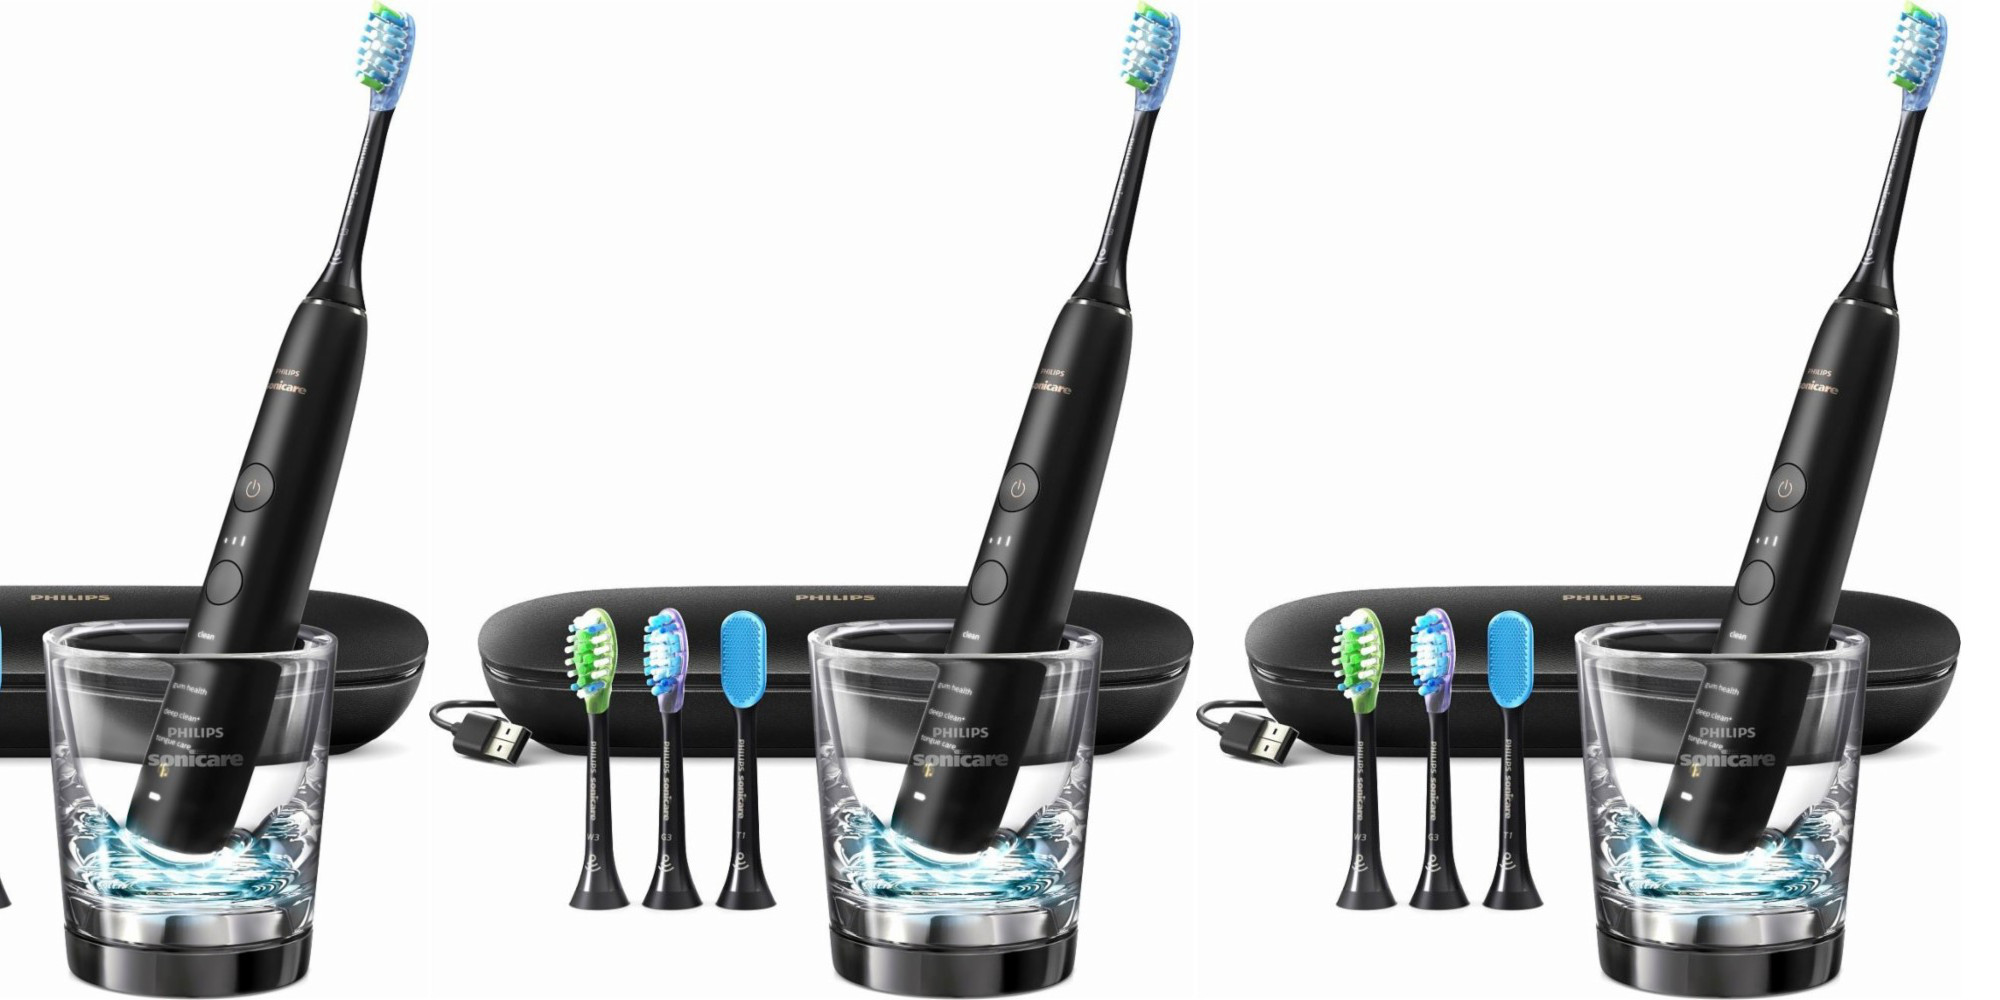 Philips Sonicare iOS/Android Smart Electric Toothbrush: $160 shipped (Reg. $240 ...2000 x 1000